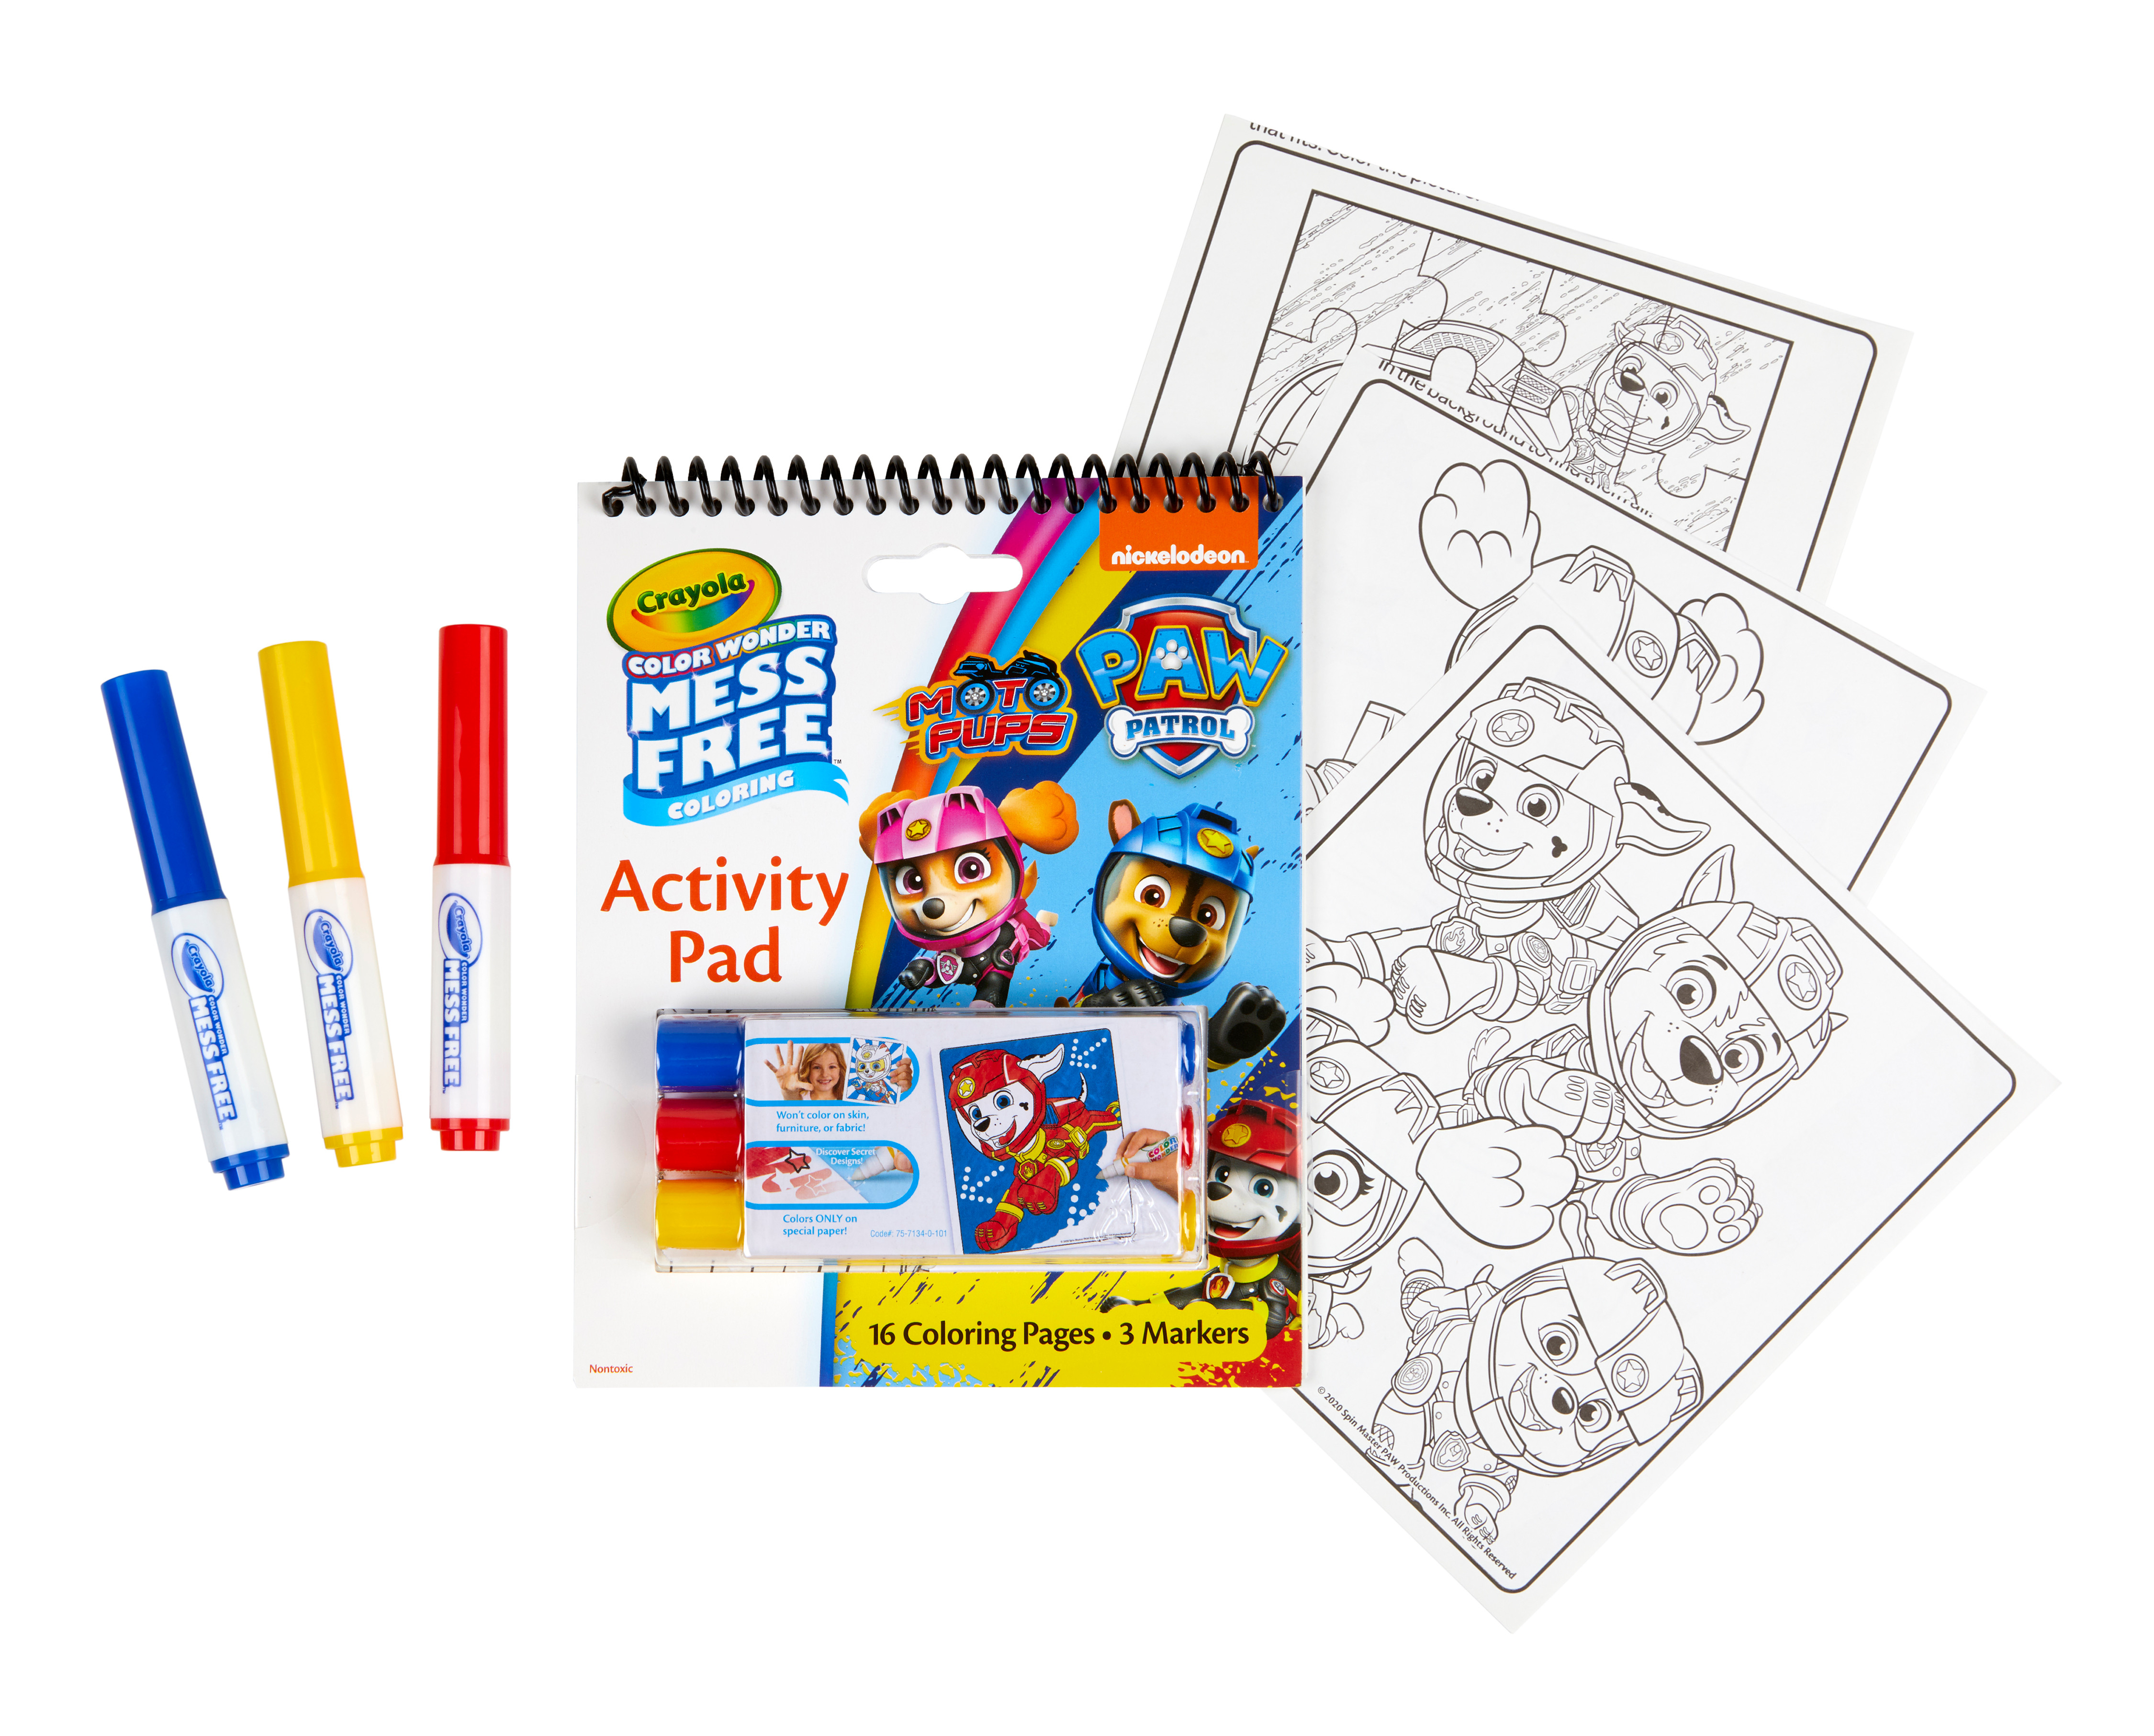 Crayola Color Wonder Paw Patrol Coloring Book & Activity Pad, 16 Pages, Unisex Child - image 5 of 7